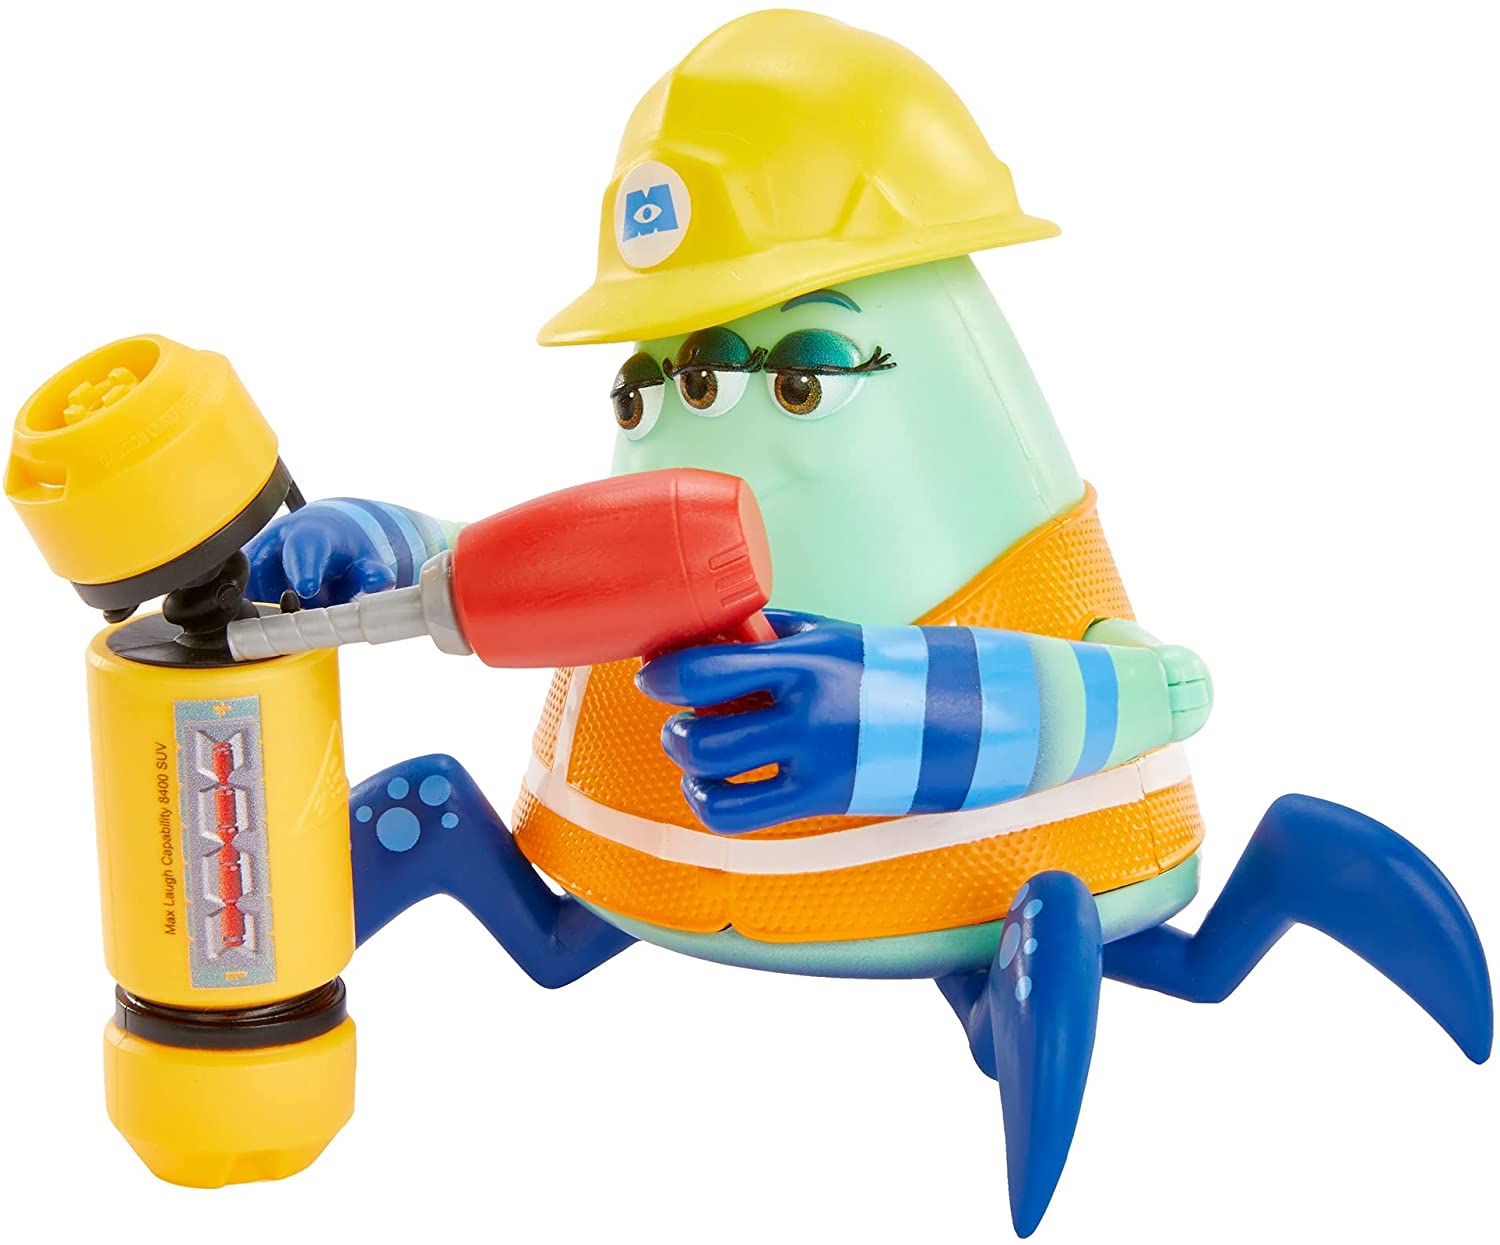 Disney Monsters at Work Cutter Action Figure